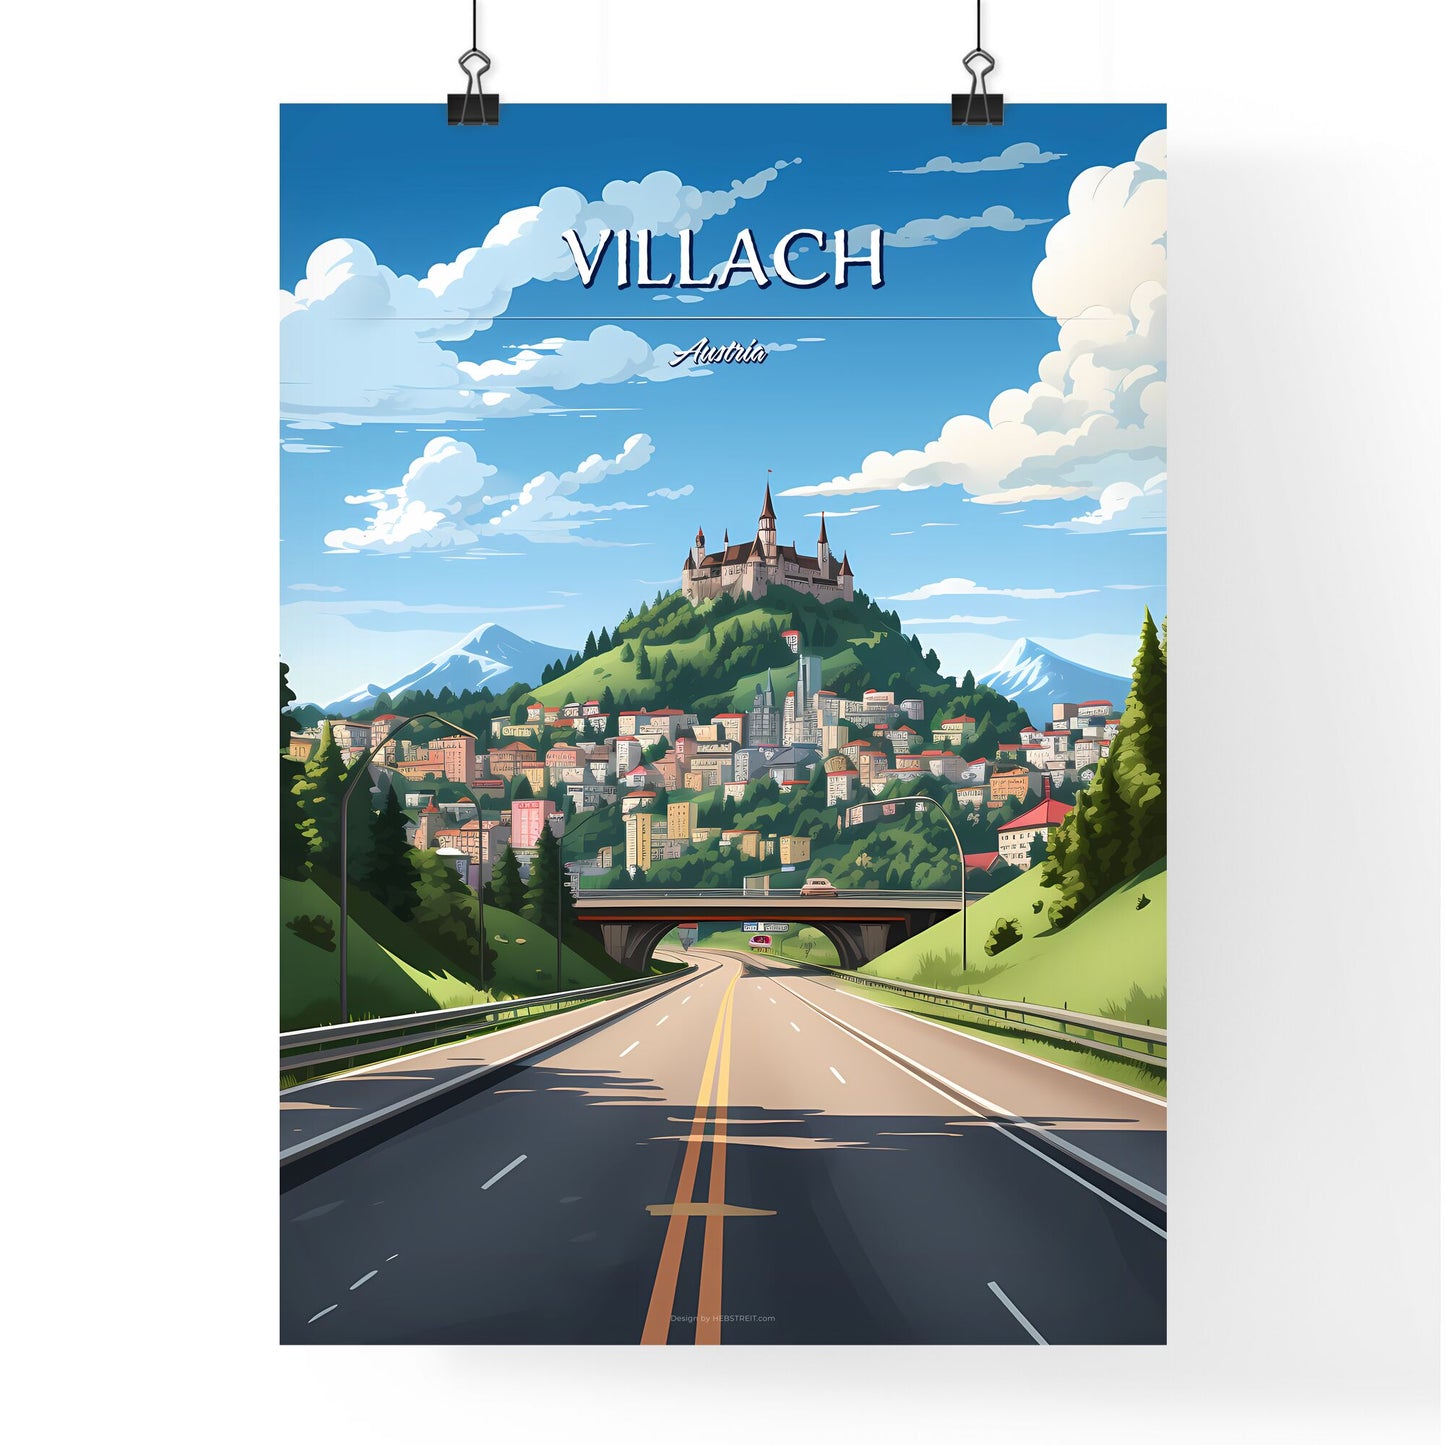 Villach, Austria - Art print of a road with a castle on top of a hill Default Title